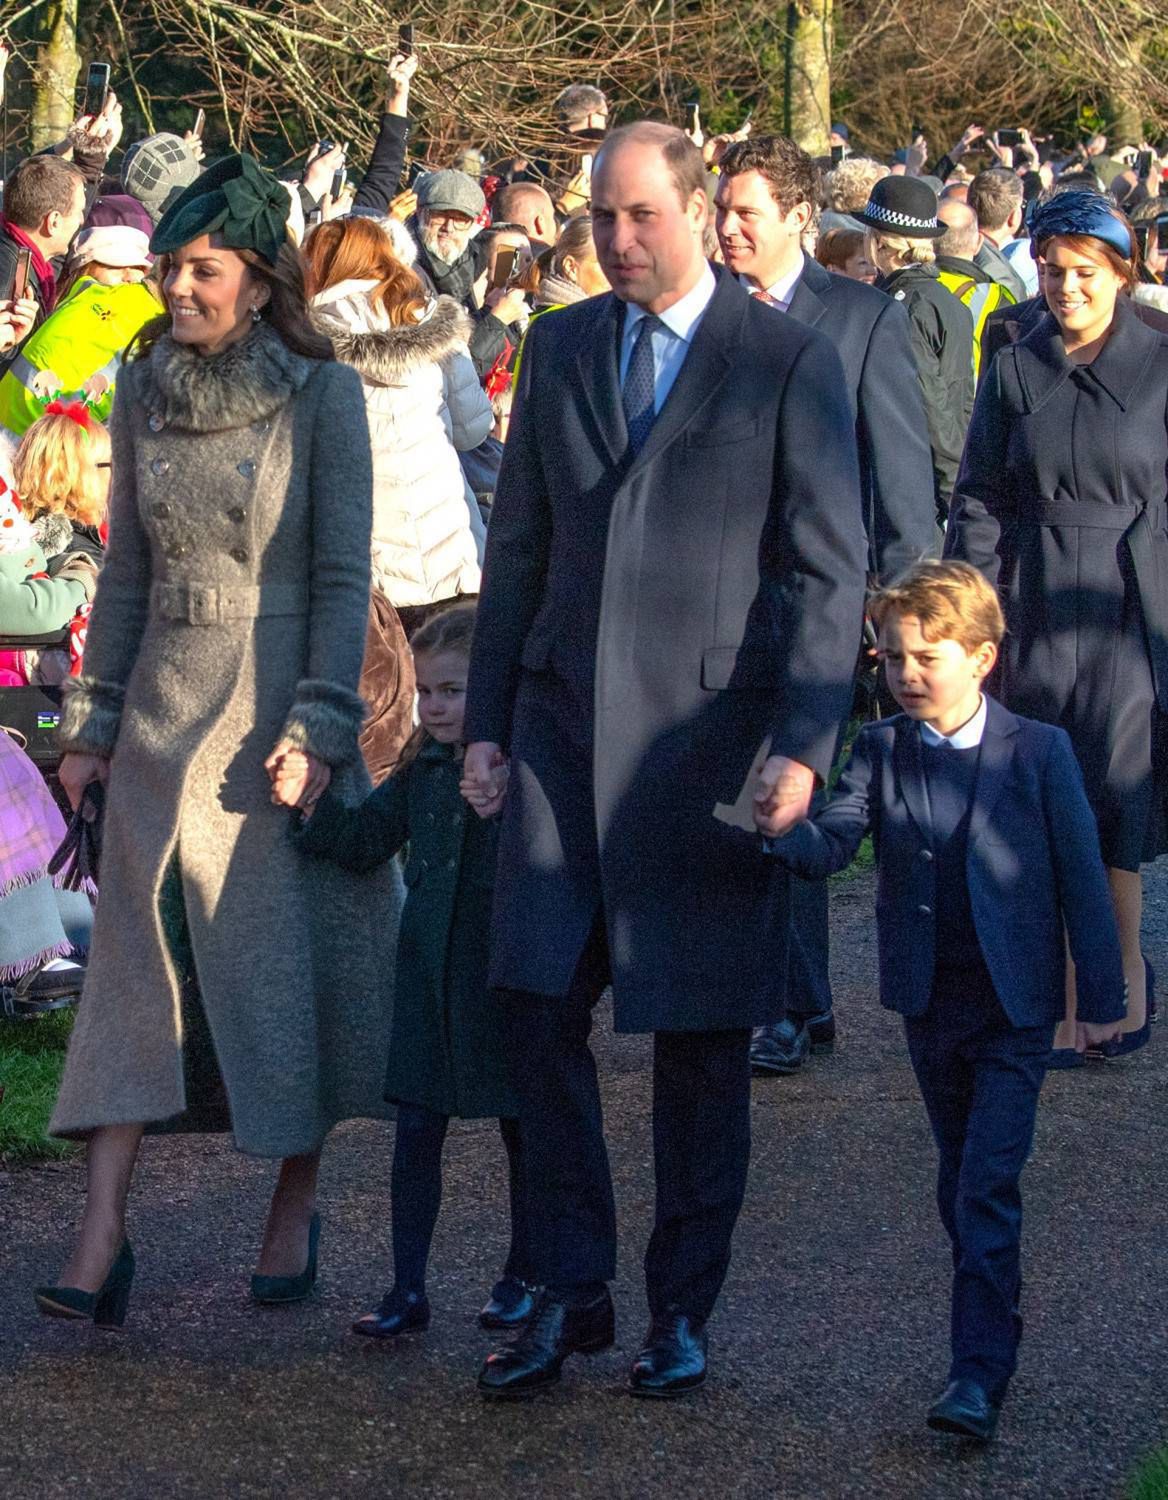 The Royal family attend Christmas Day Church service at Church of St Mary Magdalene on the Sandringham estate in Norfolk    Pictured: Catherine,the Duchess of Cambridge,Princess Charlotte,Prince William,the Duke of Cambridge and Prince George      World Rights,